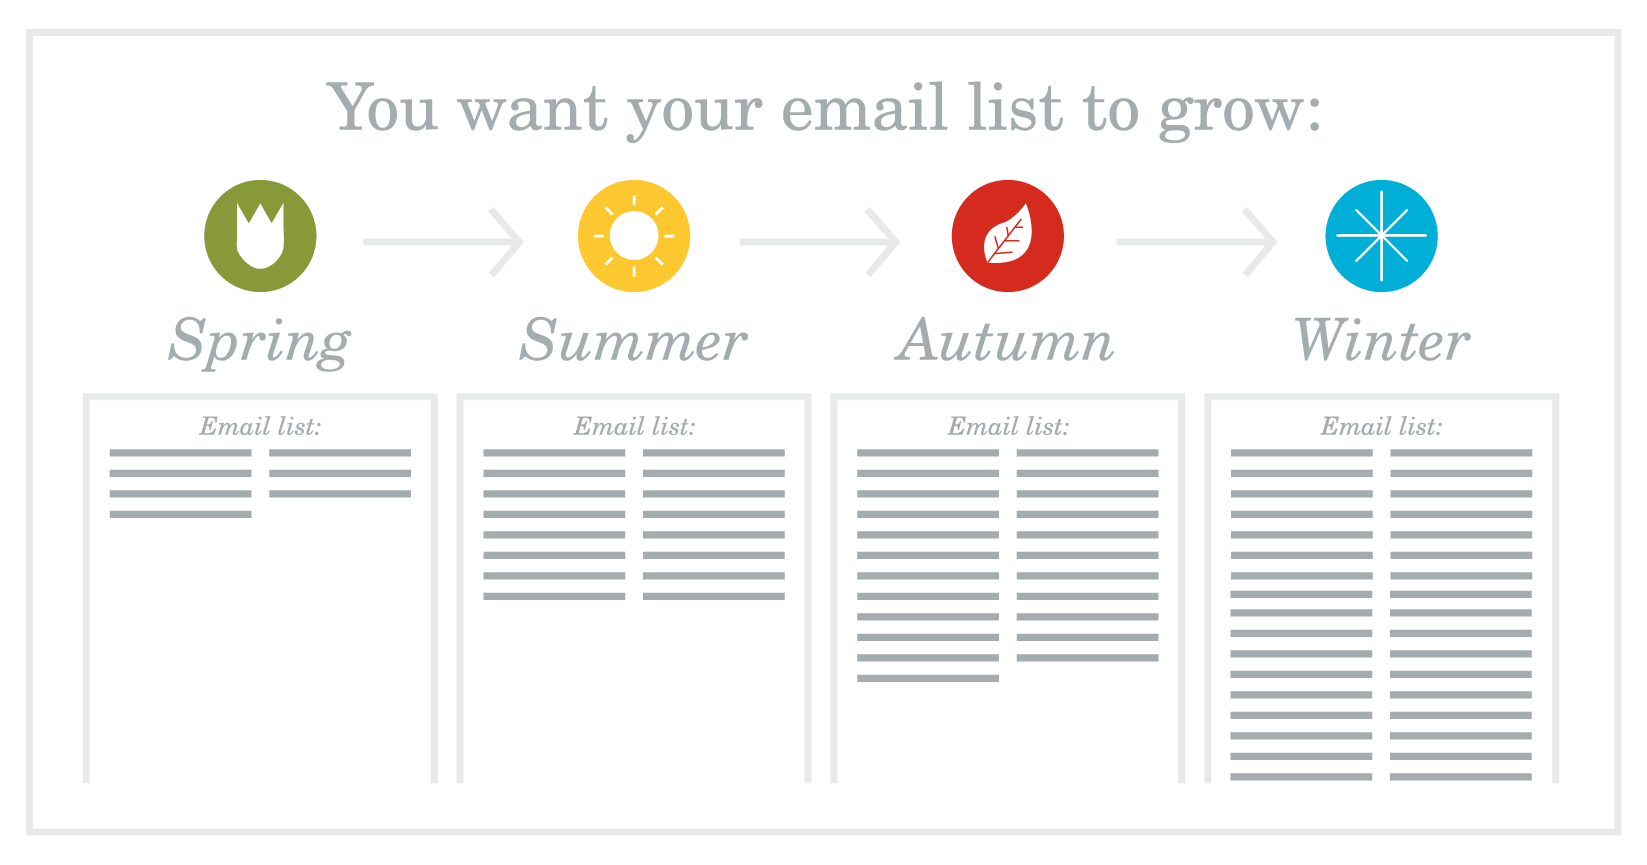 You want you email list to grow from Spring to Summer to Autumn and to Winter